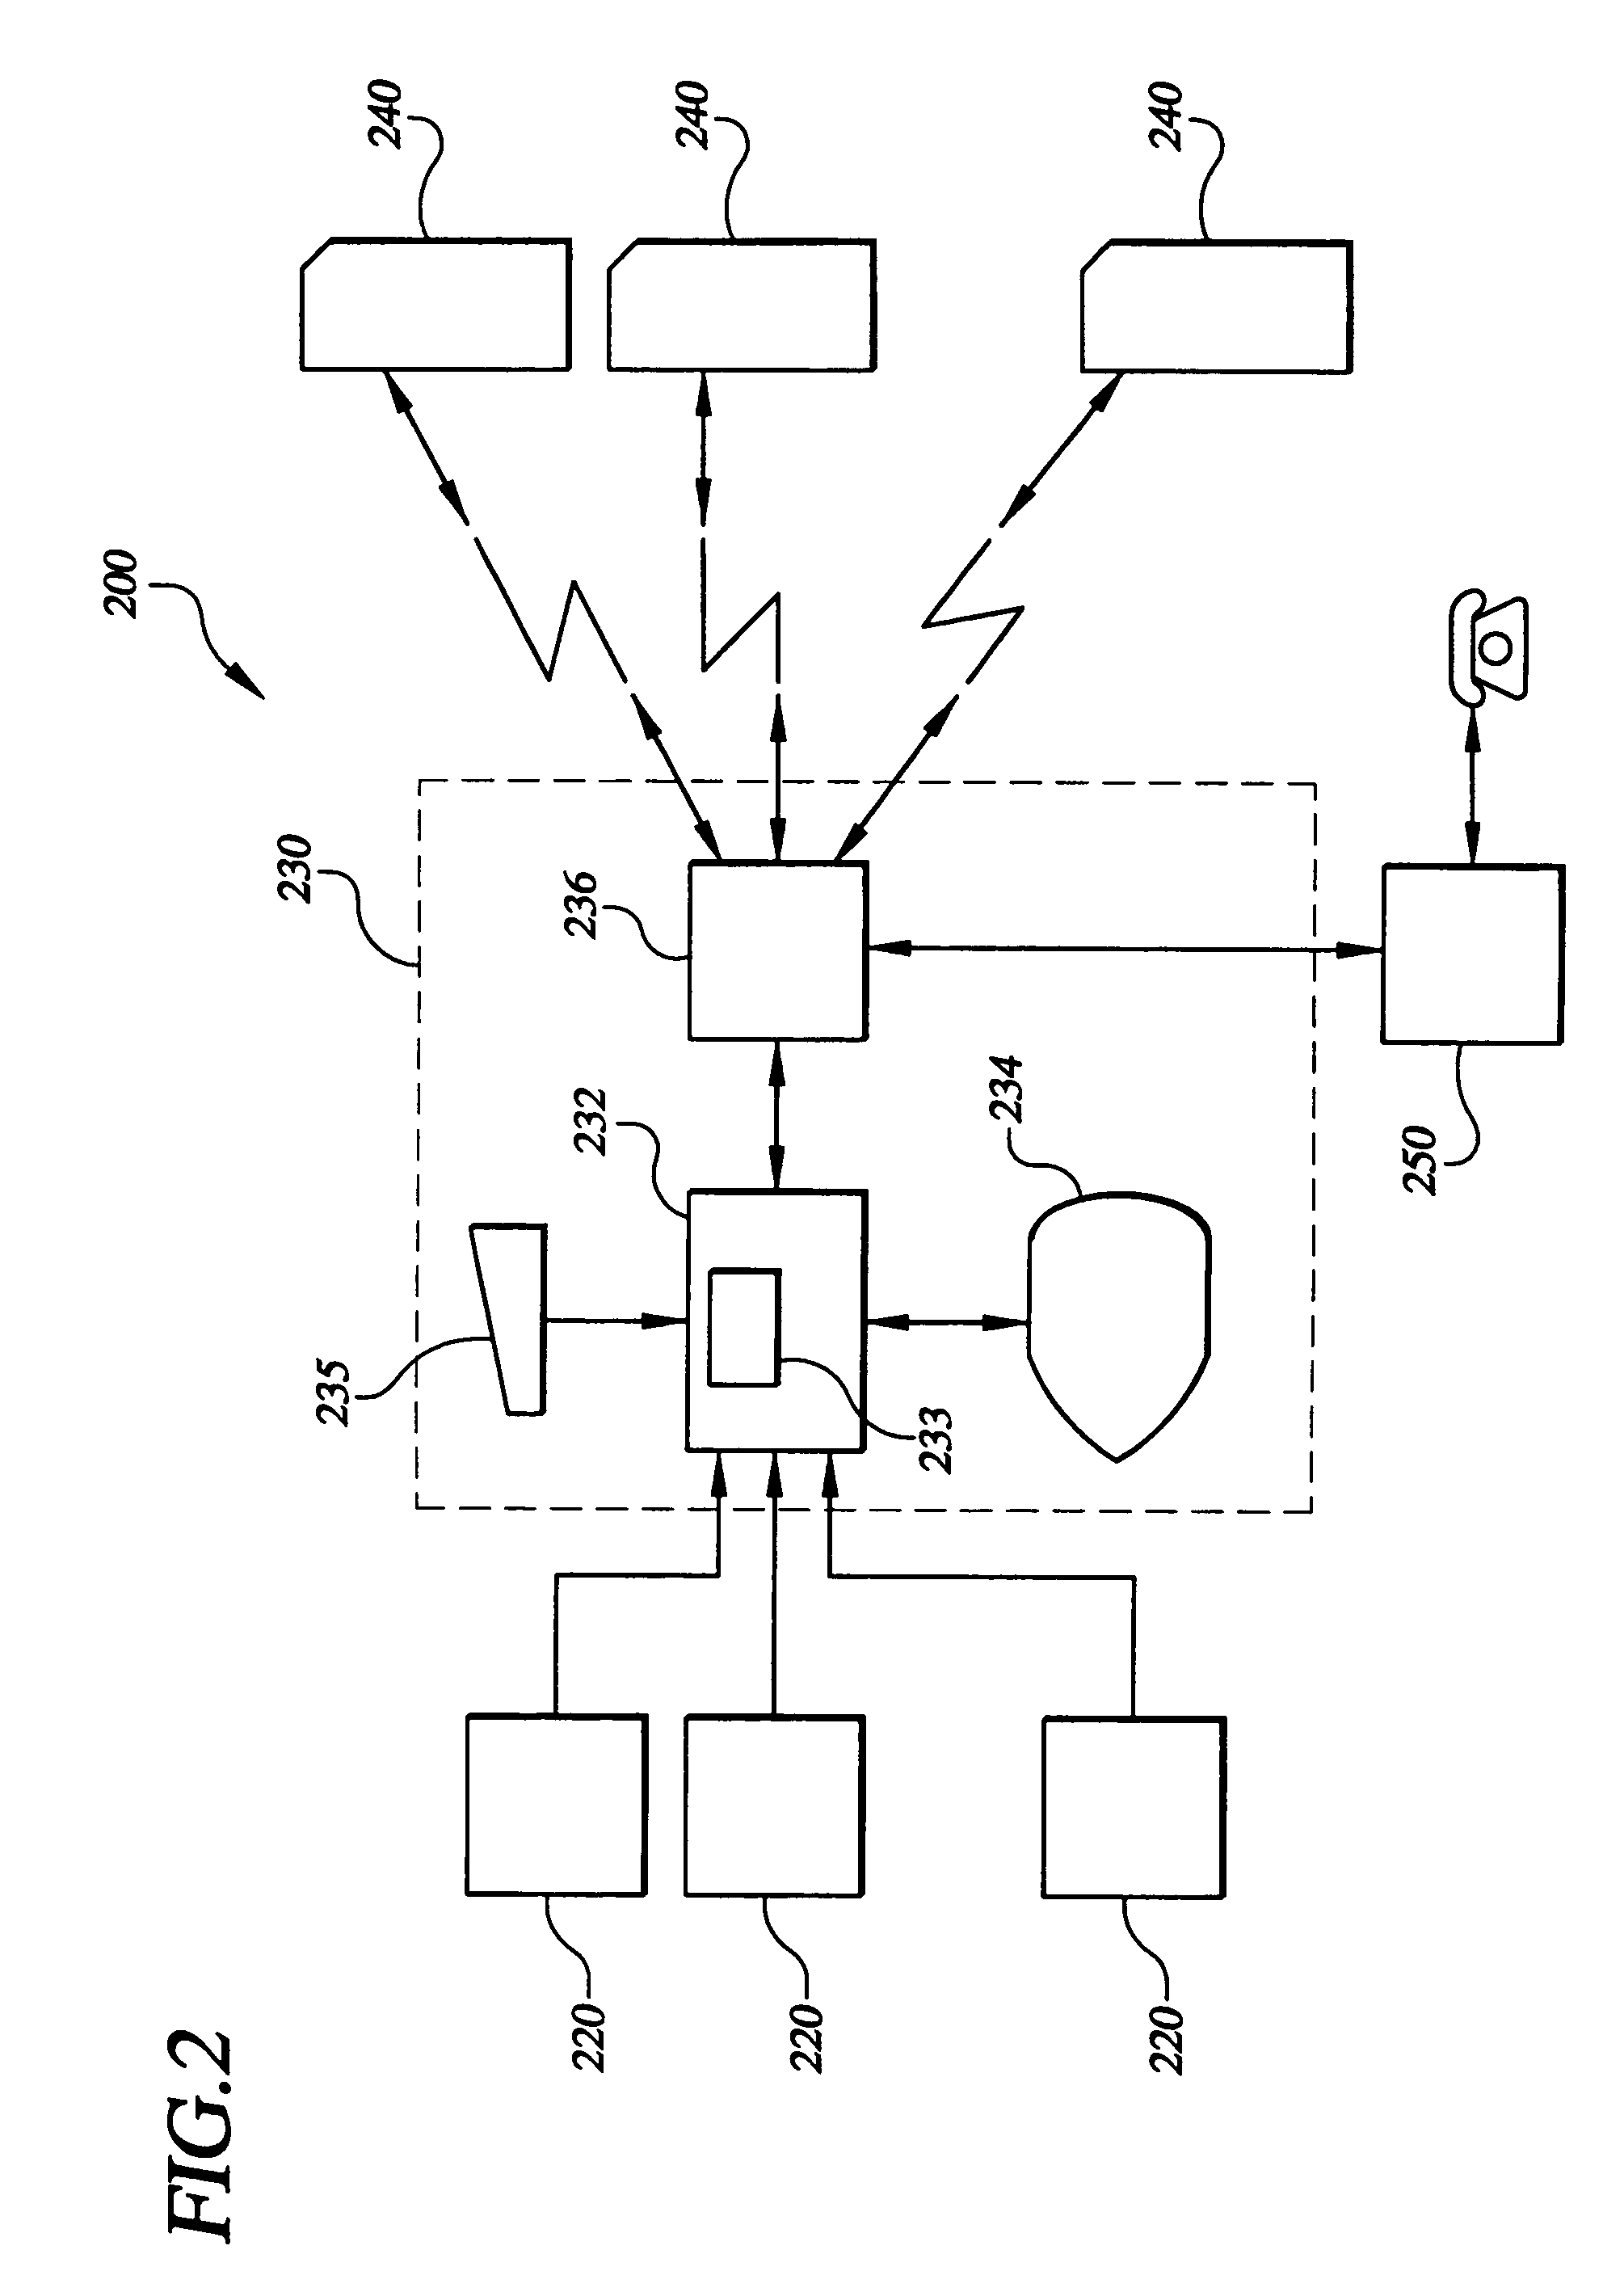 System and method for wireless transmission of security alarms to selected groups